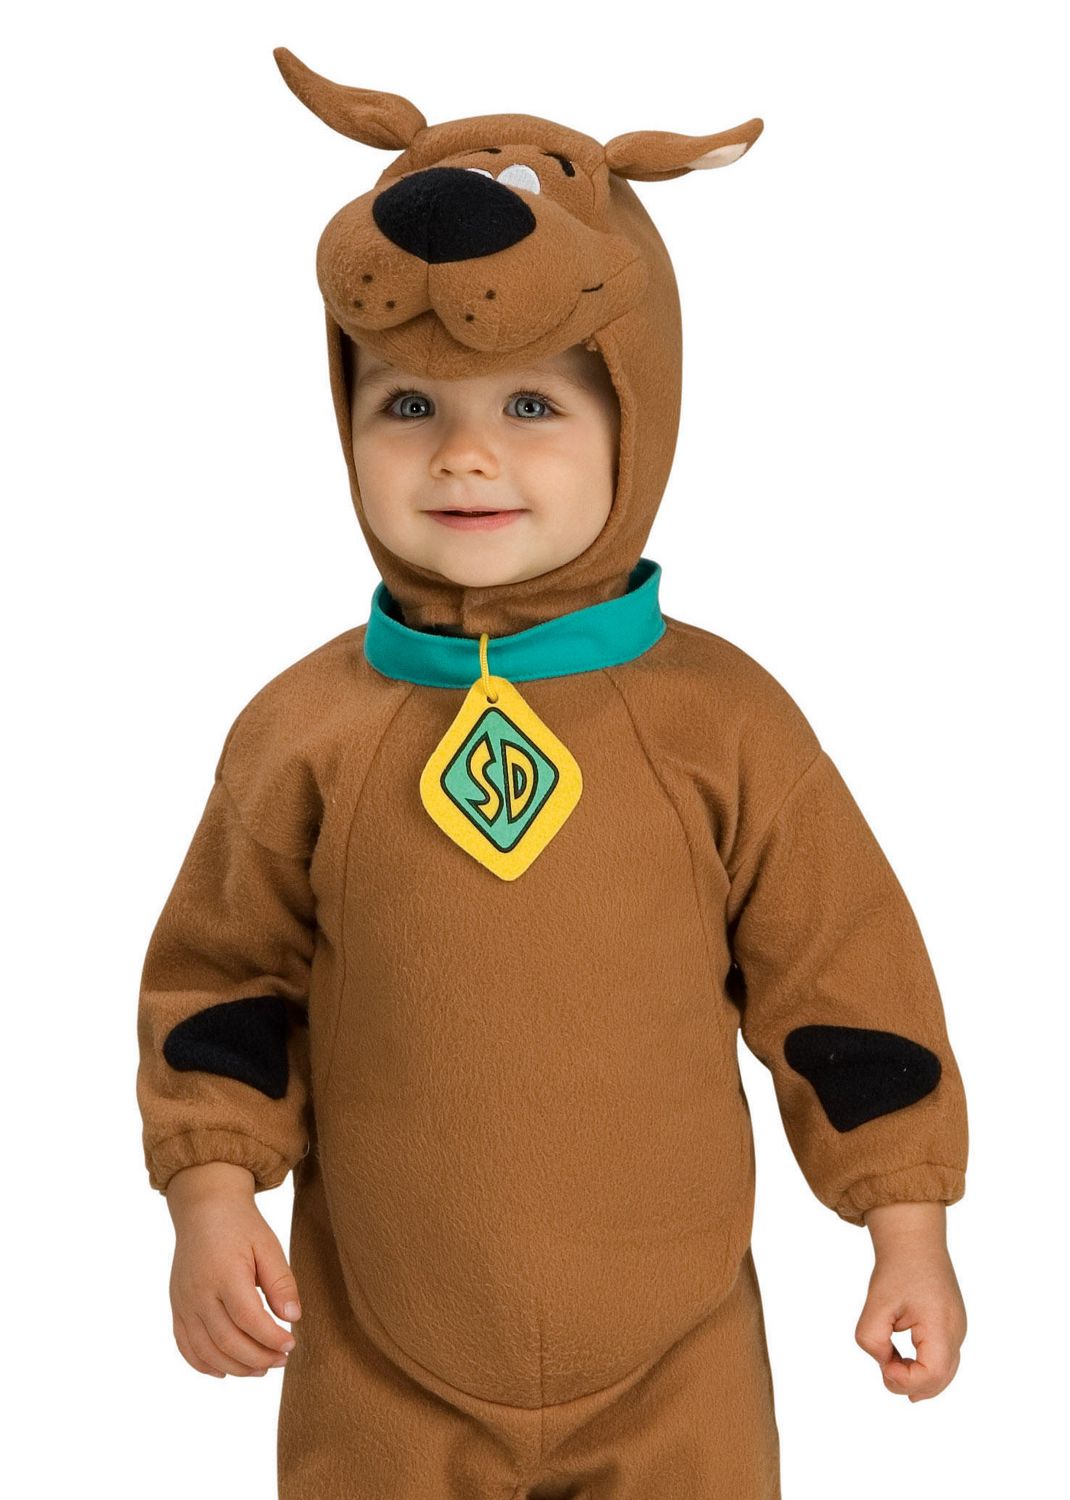 Boys Officially Licensed Warner Brothers Scooby Doo Halloween Costume M ...